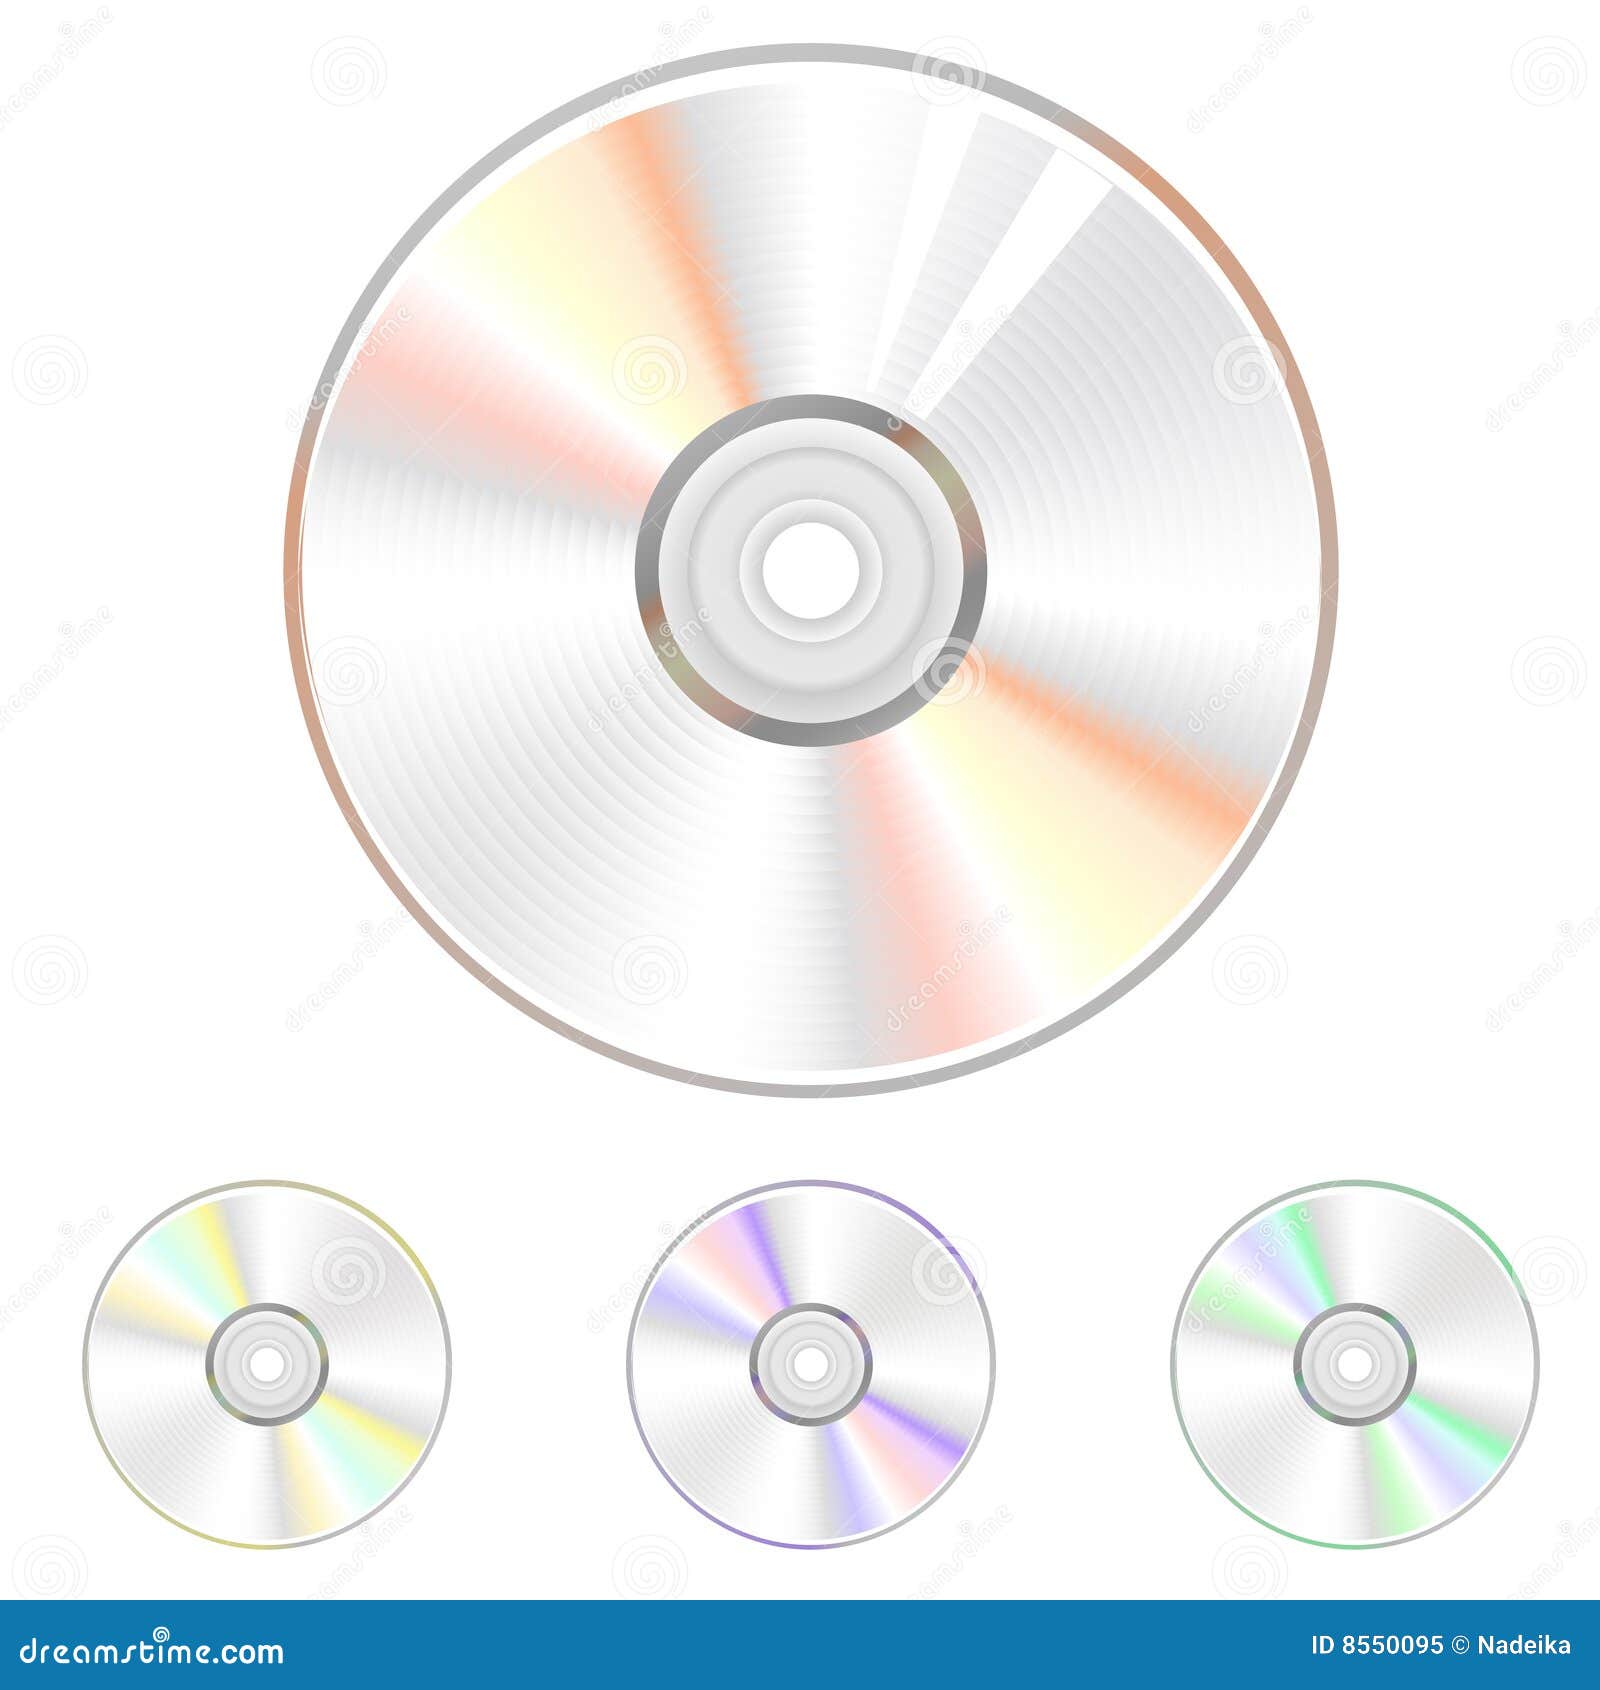 clipart collection on cd - photo #23